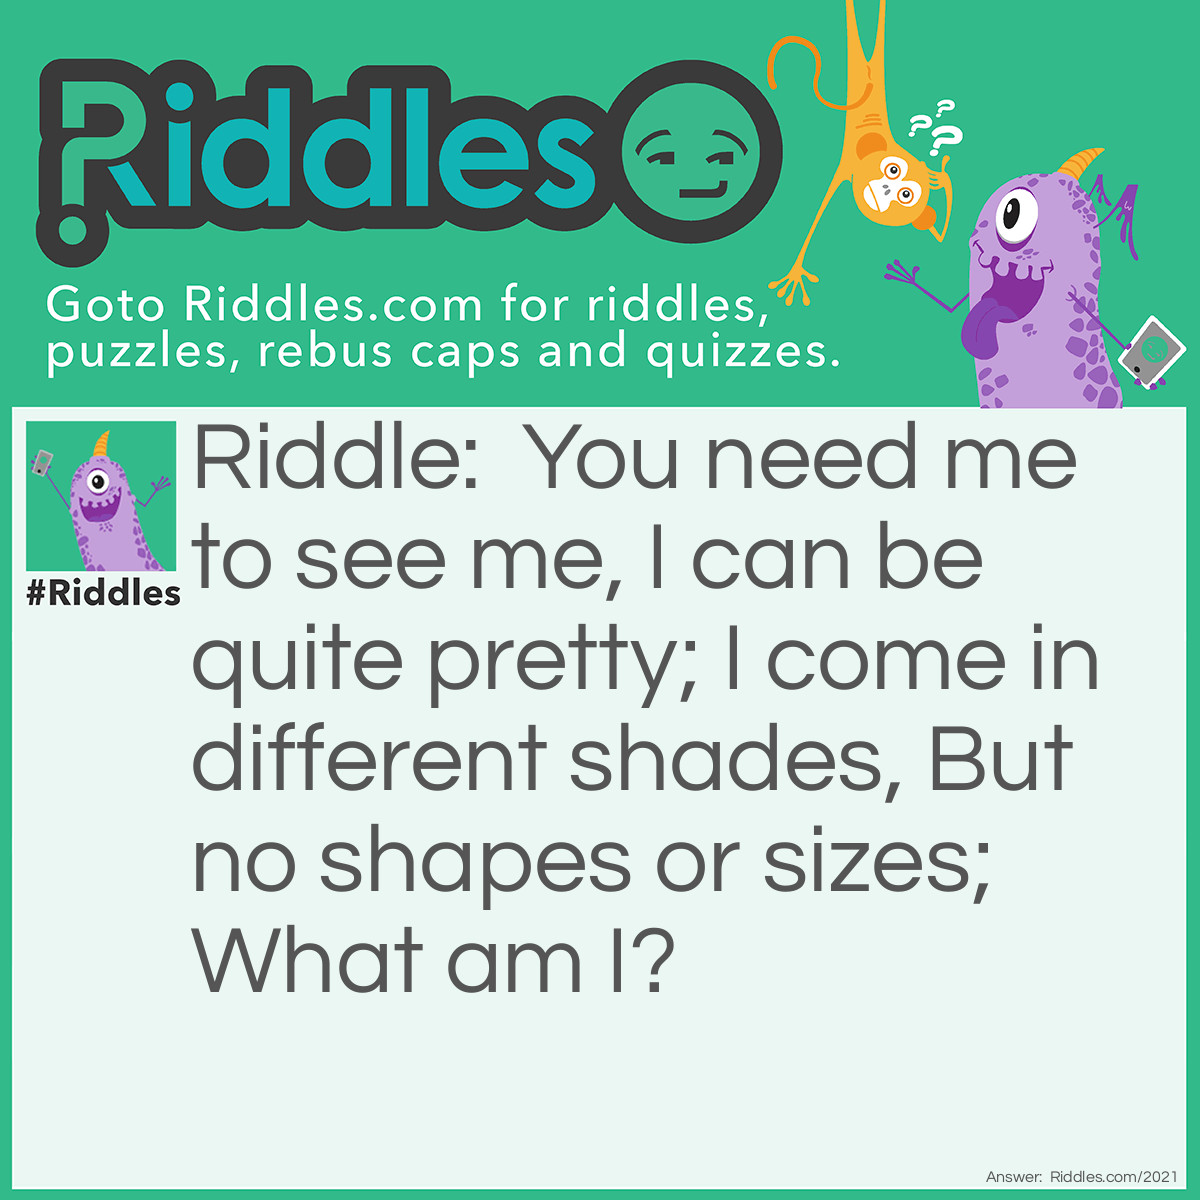 Riddle: You need me to see me,
I can be quite pretty;
I come in different shades,
But no shapes or sizes;
What am I? Answer: An eye.